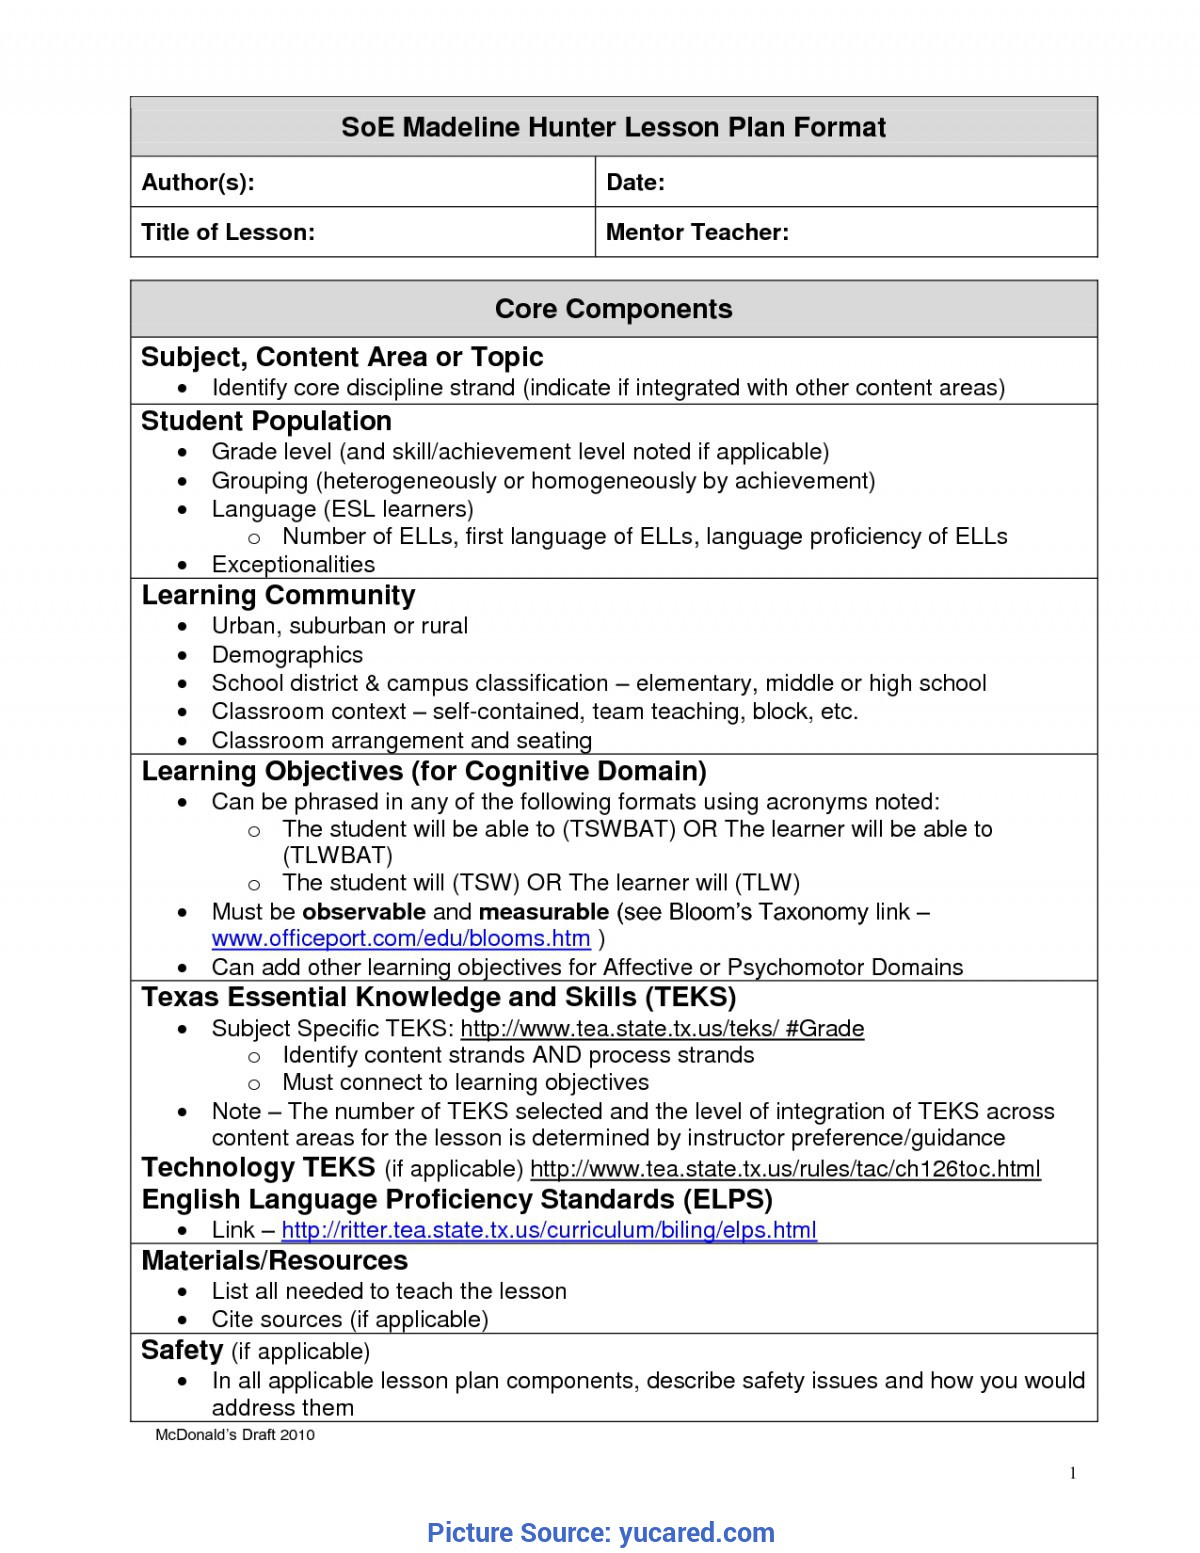 Madeline Hunter Lesson Plan Template Word | Articleezined Regarding Madeline Hunter Lesson Plan Blank Template